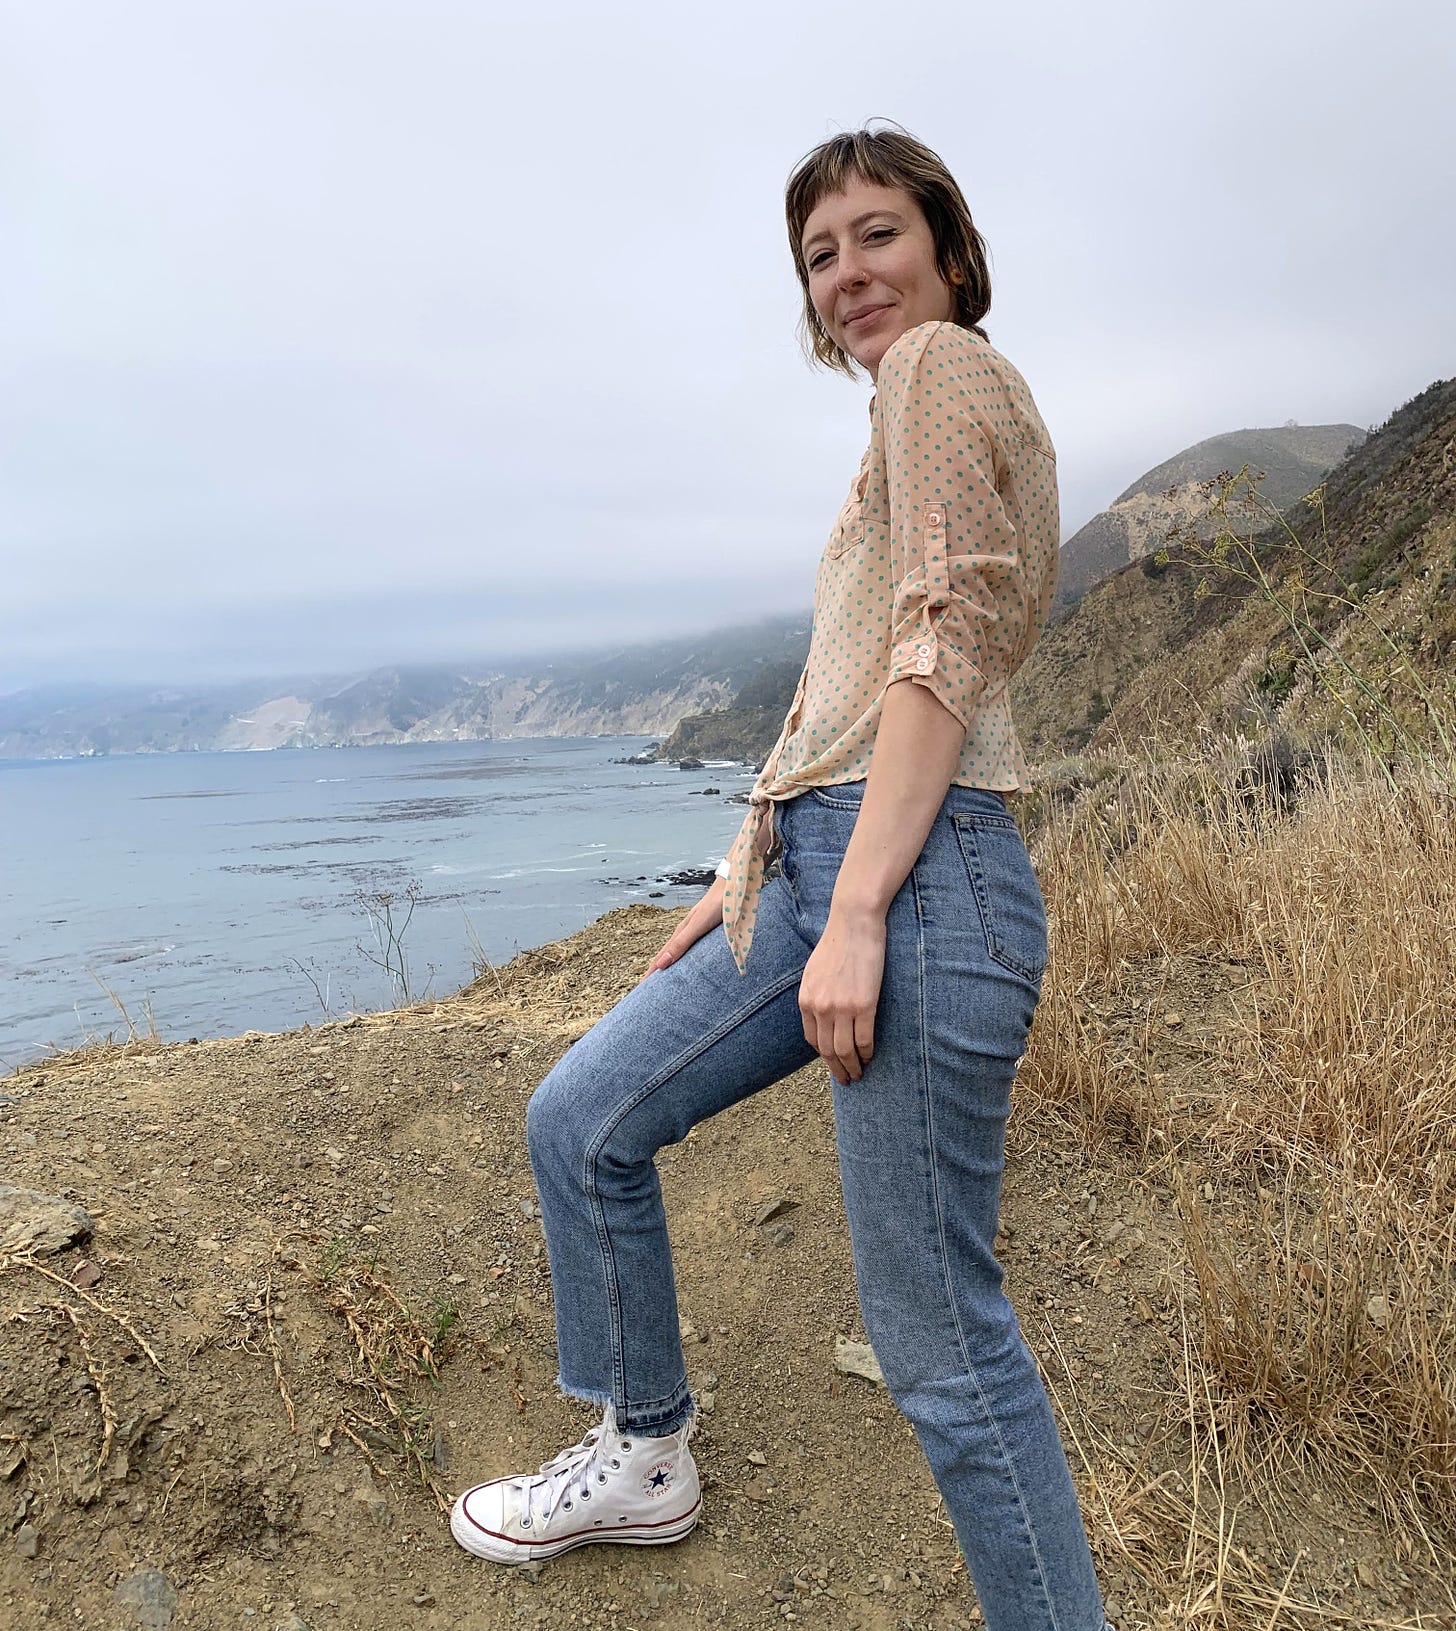 Me in a polka dot shirt, jeans, and Converse overlooking the Pacific Ocean in Big Sur